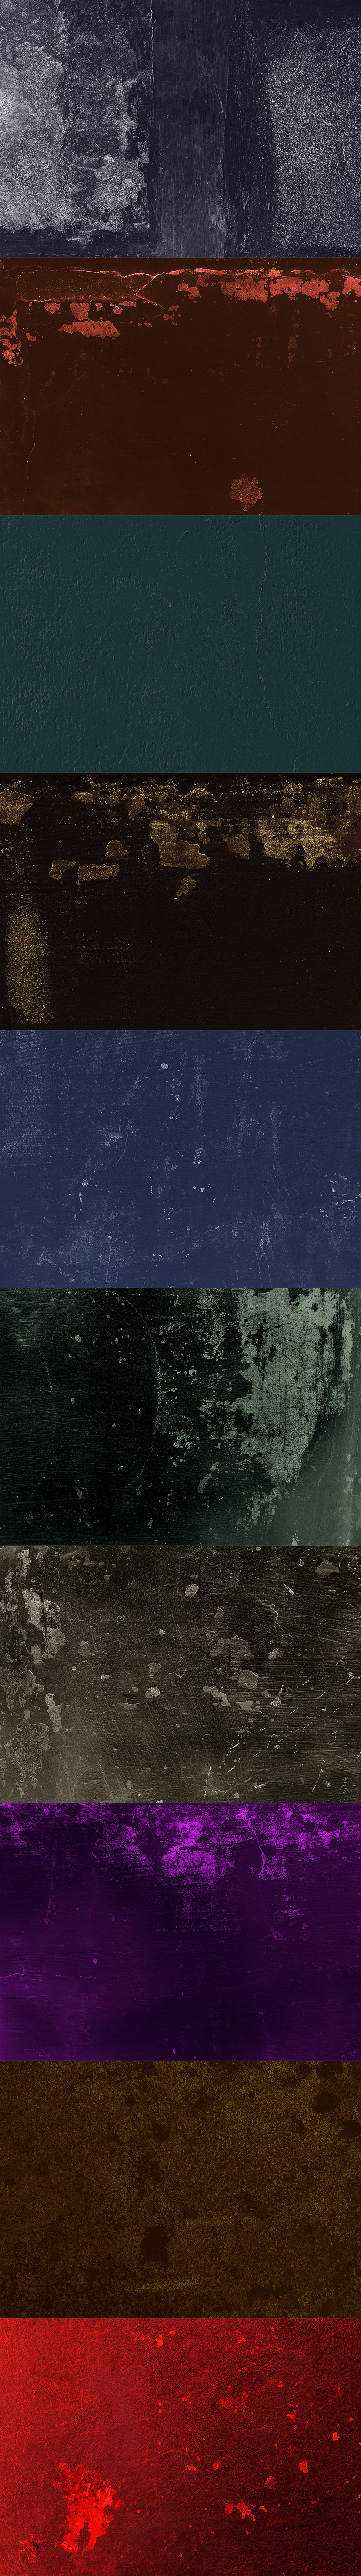 Free Dramatic Color Grunge Textures